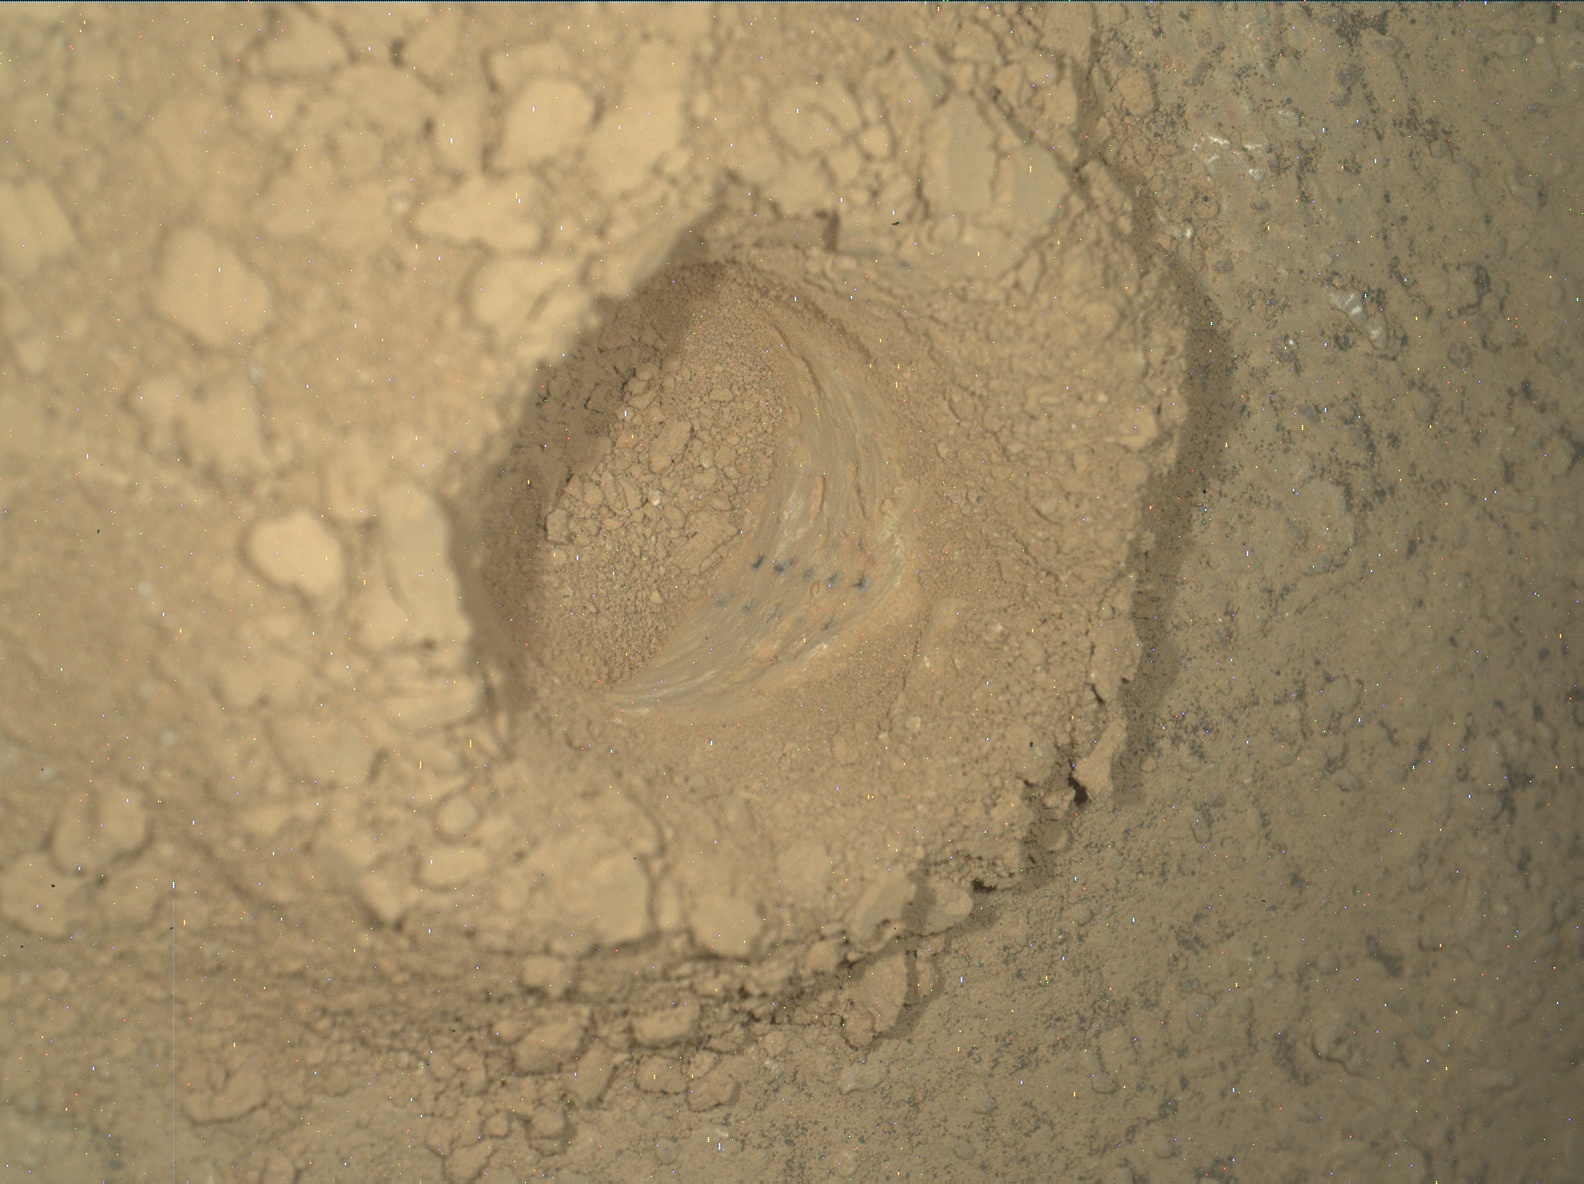 Nasa's Mars rover Curiosity acquired this image using its Mars Hand Lens Imager (MAHLI) on Sol 3246